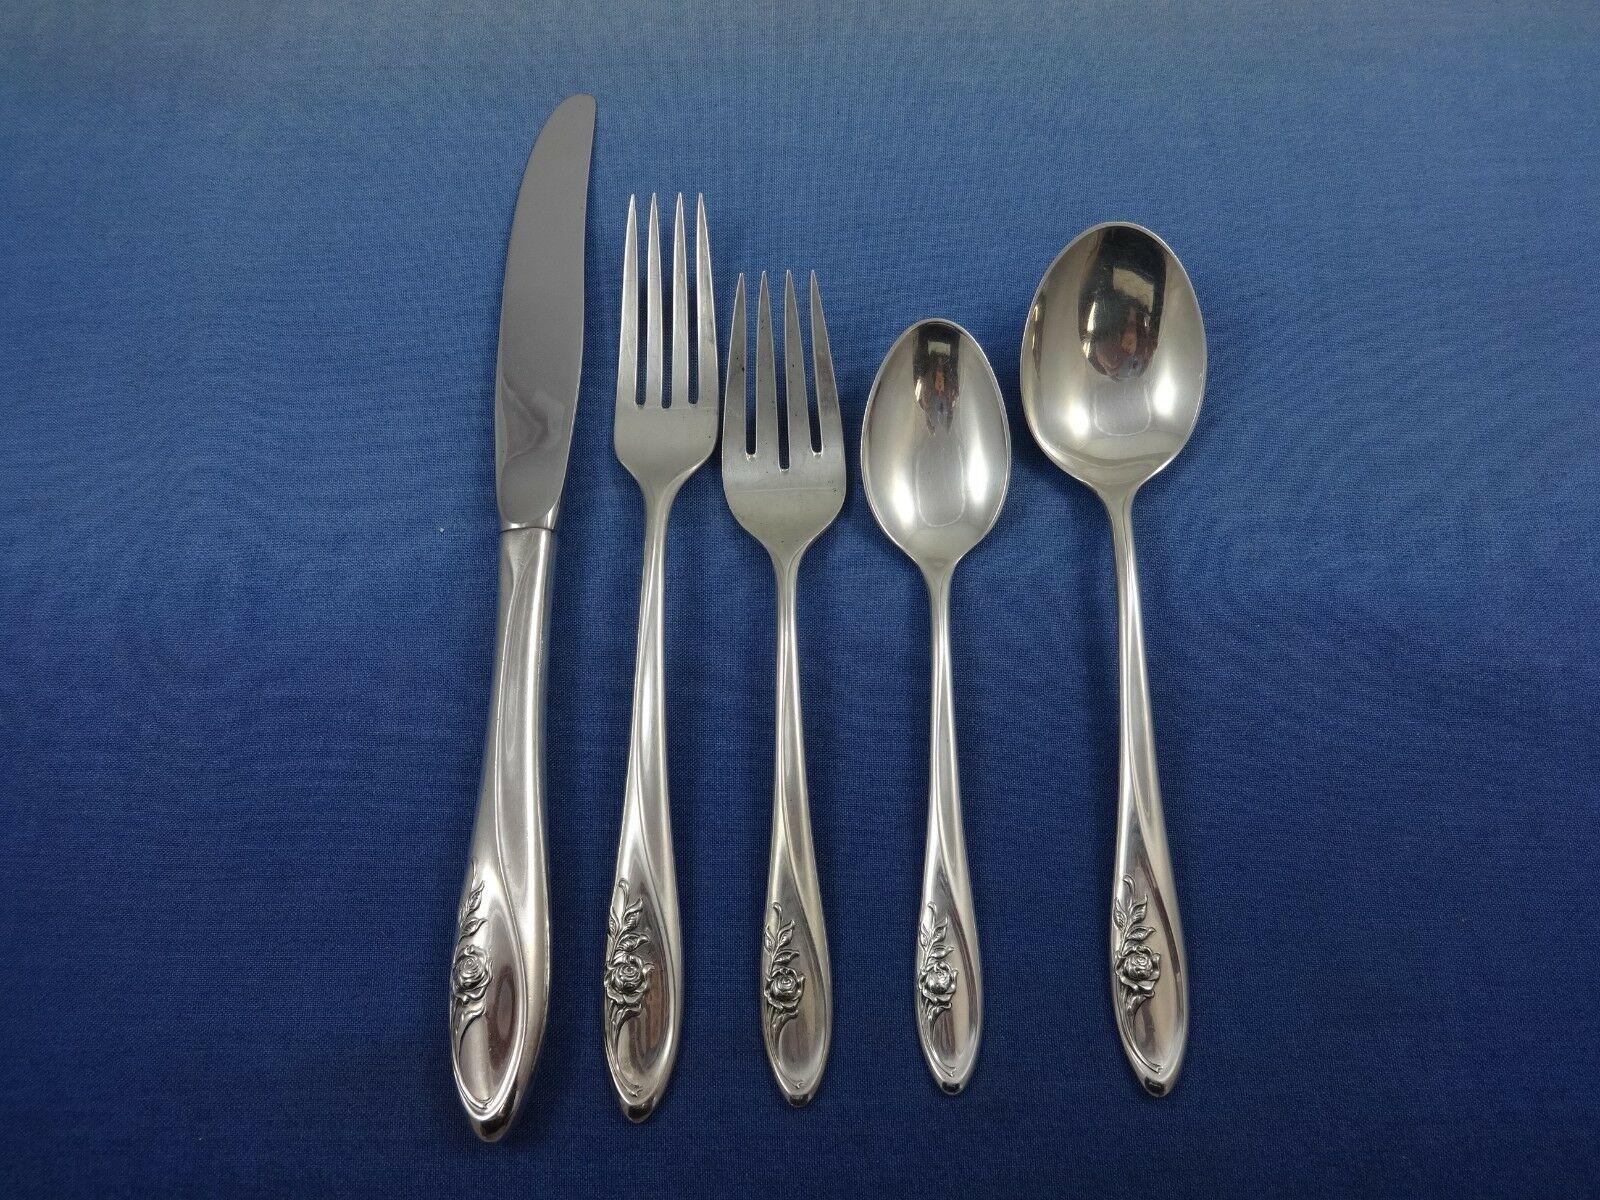 Lovely sculptured rose by Towle sterling silver flatware set - 65 pieces. This set includes:

12 knives, 9 1/8